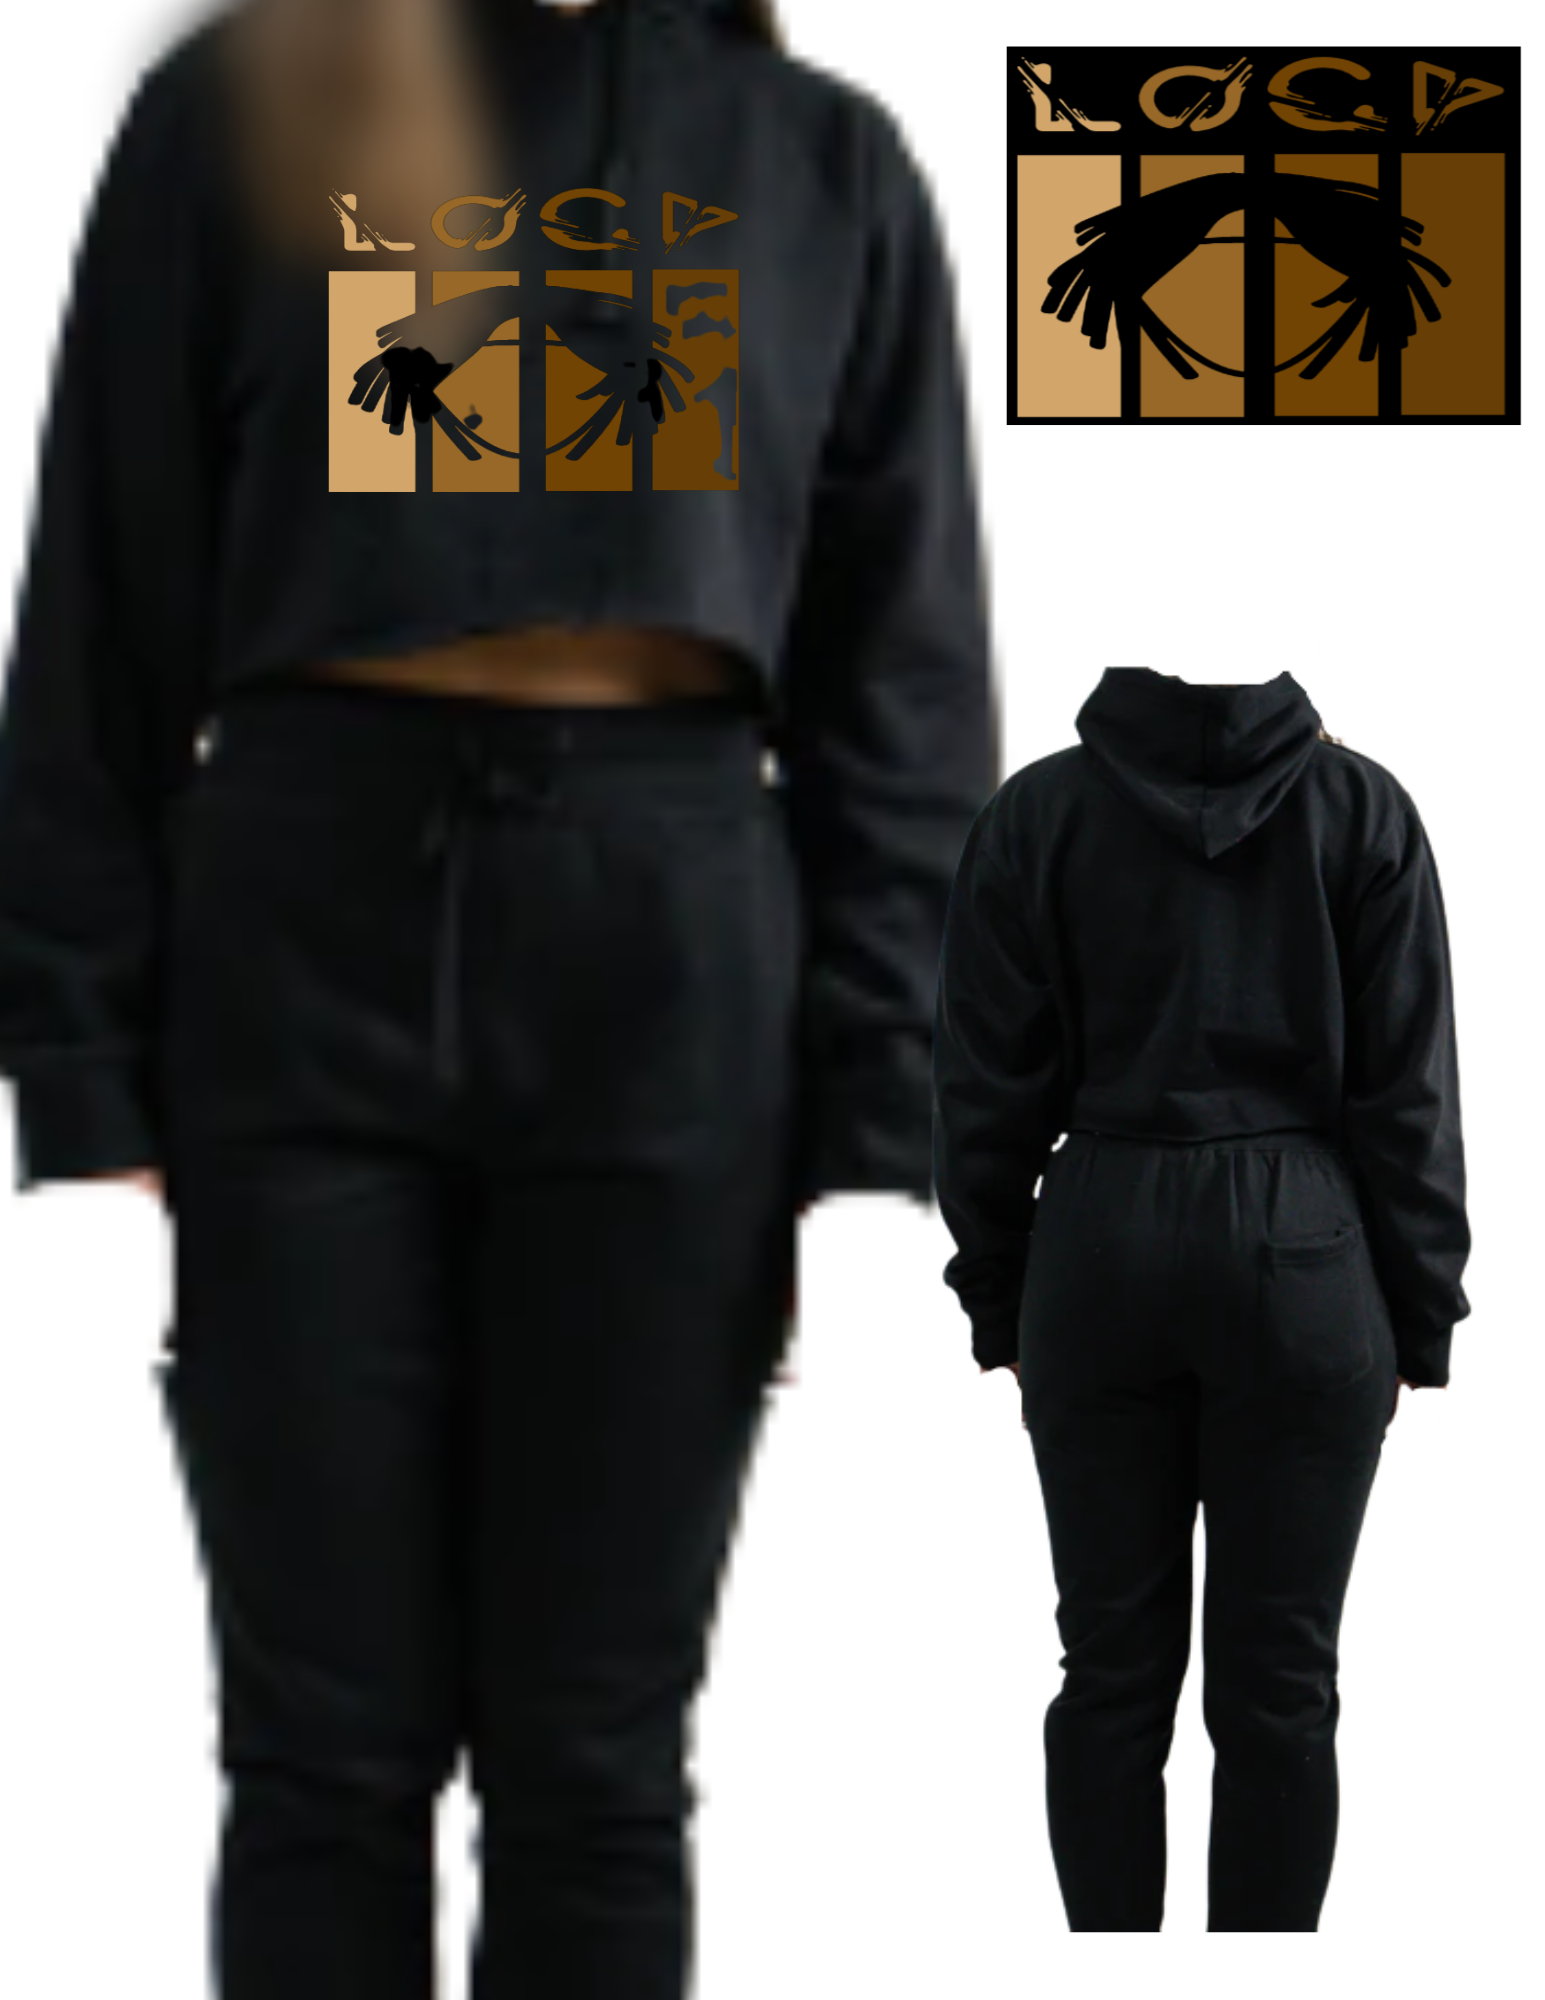 Women's Sweats, Locs, And Lattes Olive Green Cropped Sweatsuit